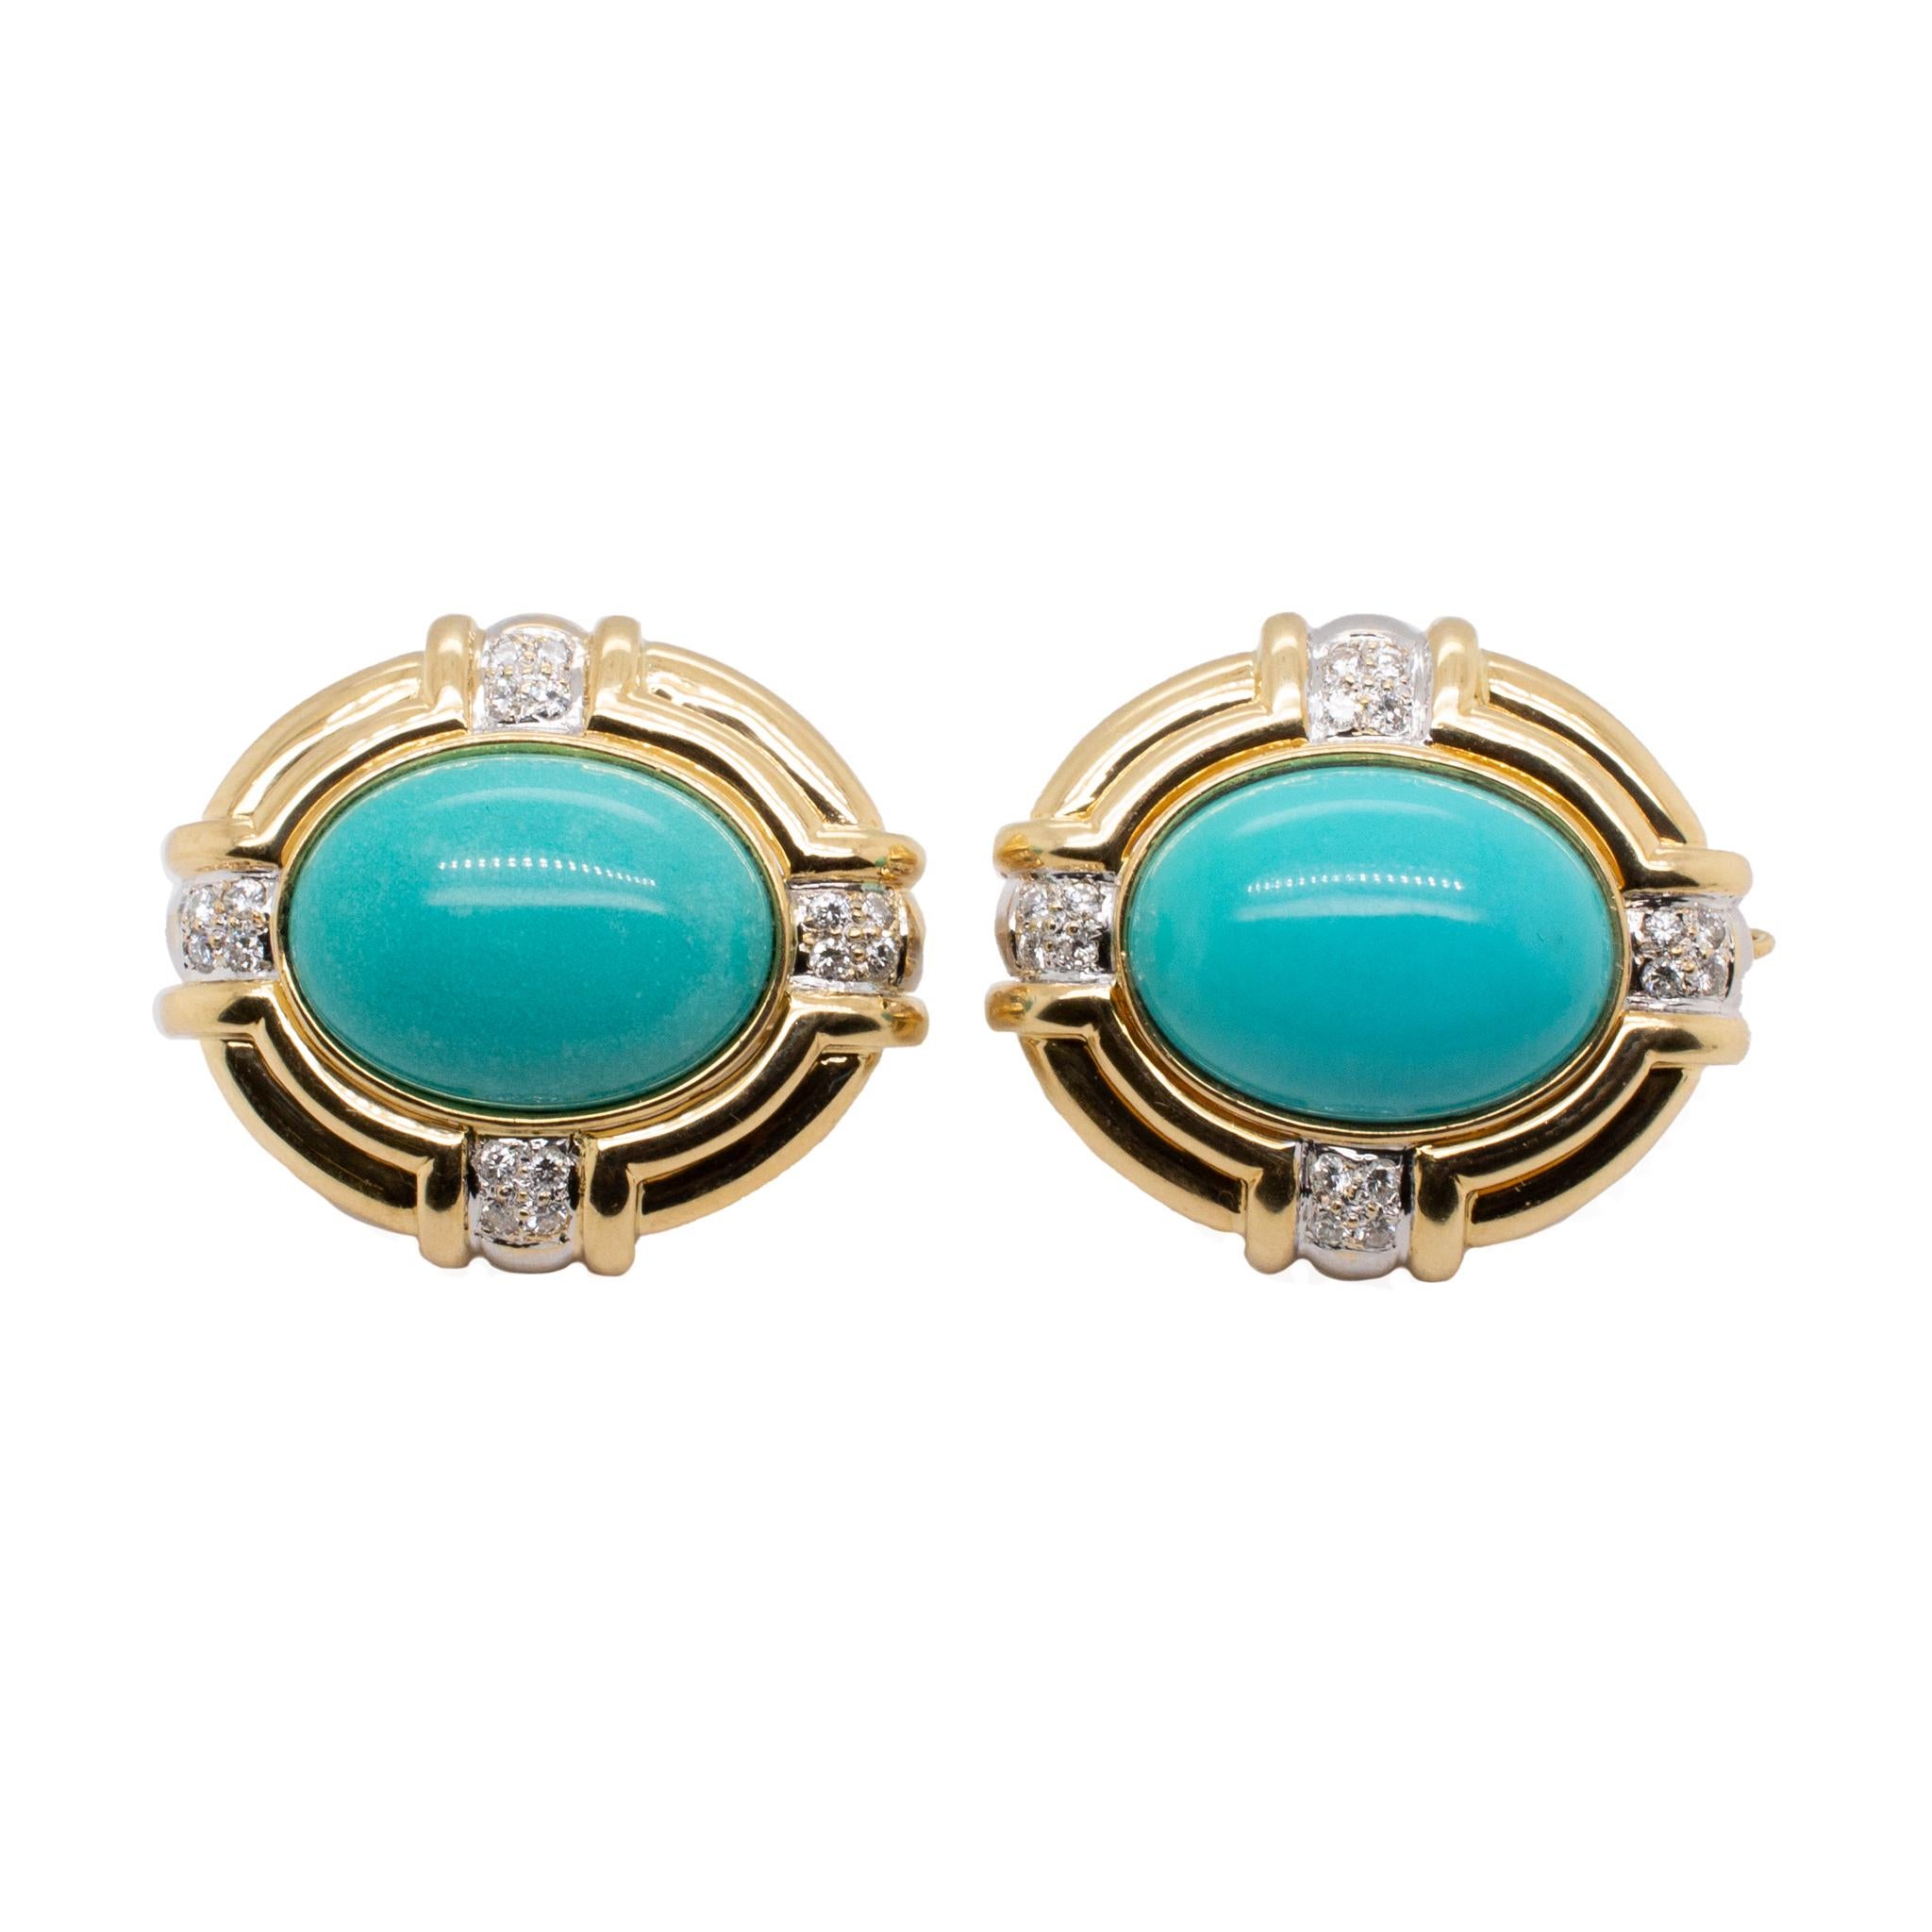 One pair of lady's custom made polished 18K yellow gold, diamond and turquoise clip-on, antique, vintage earrings. The earrings measure approximately 1.00 inches in length and weigh a total of 22.20 grams. Engraved with 